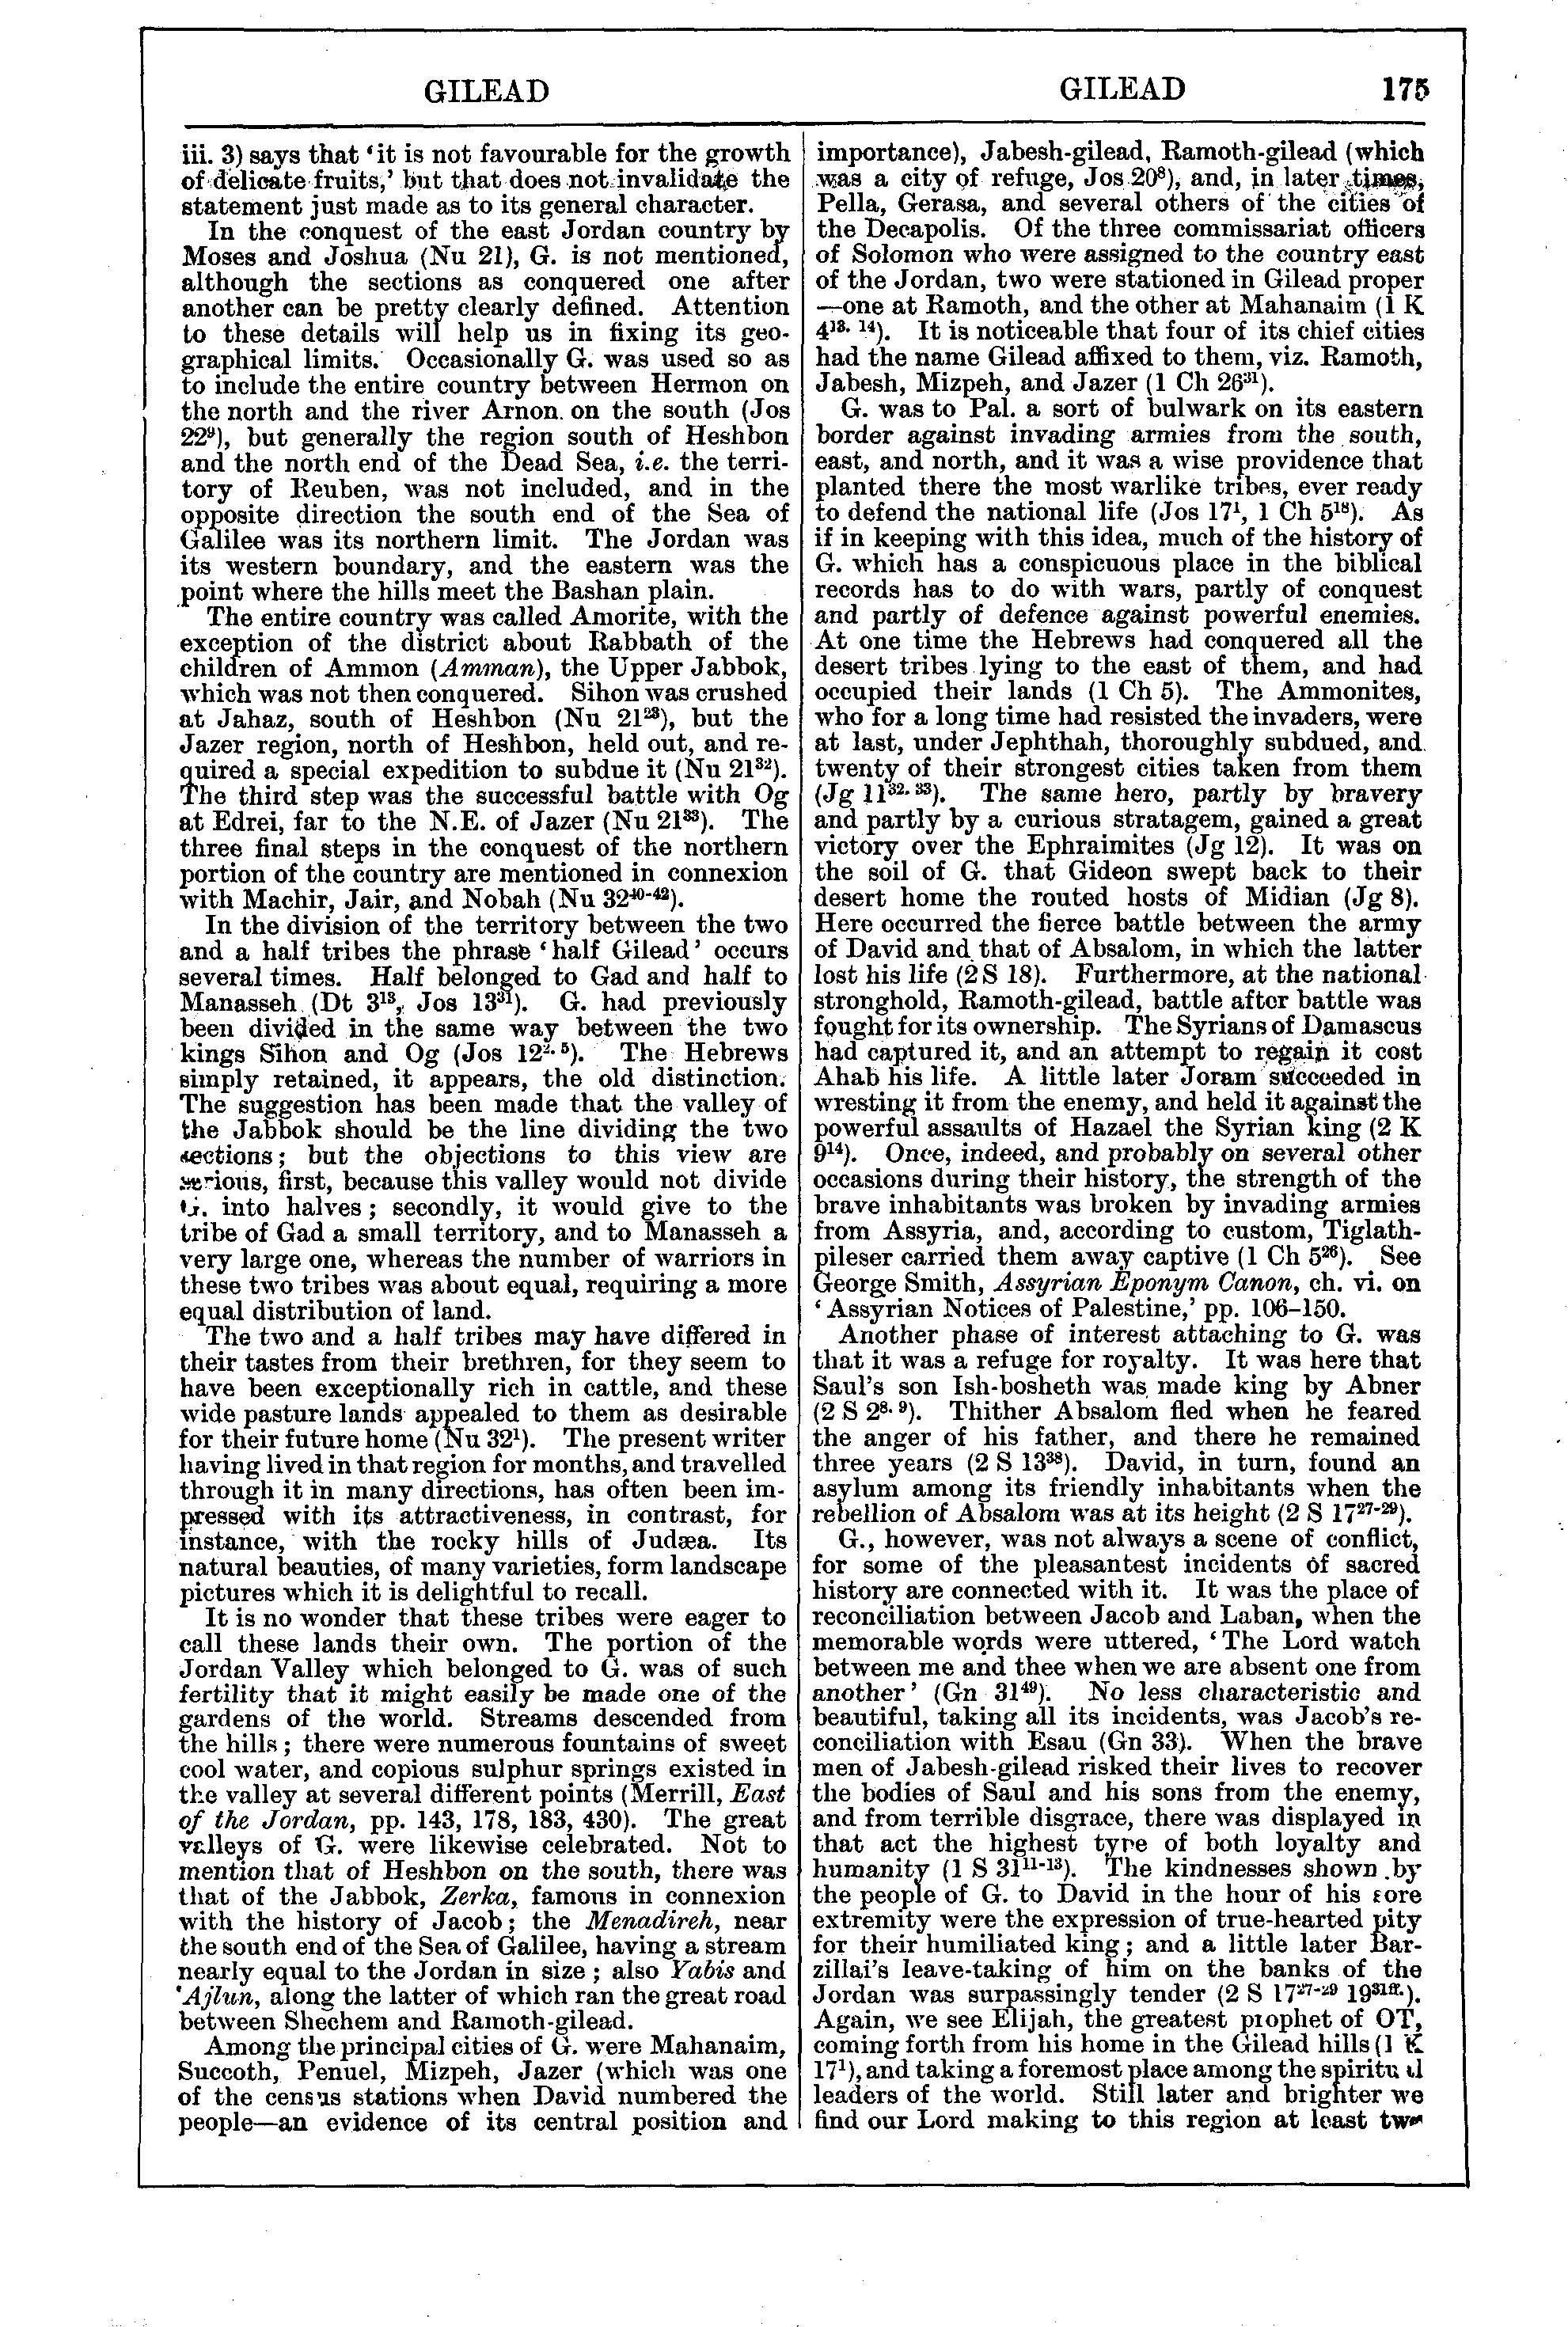 Image of page 175